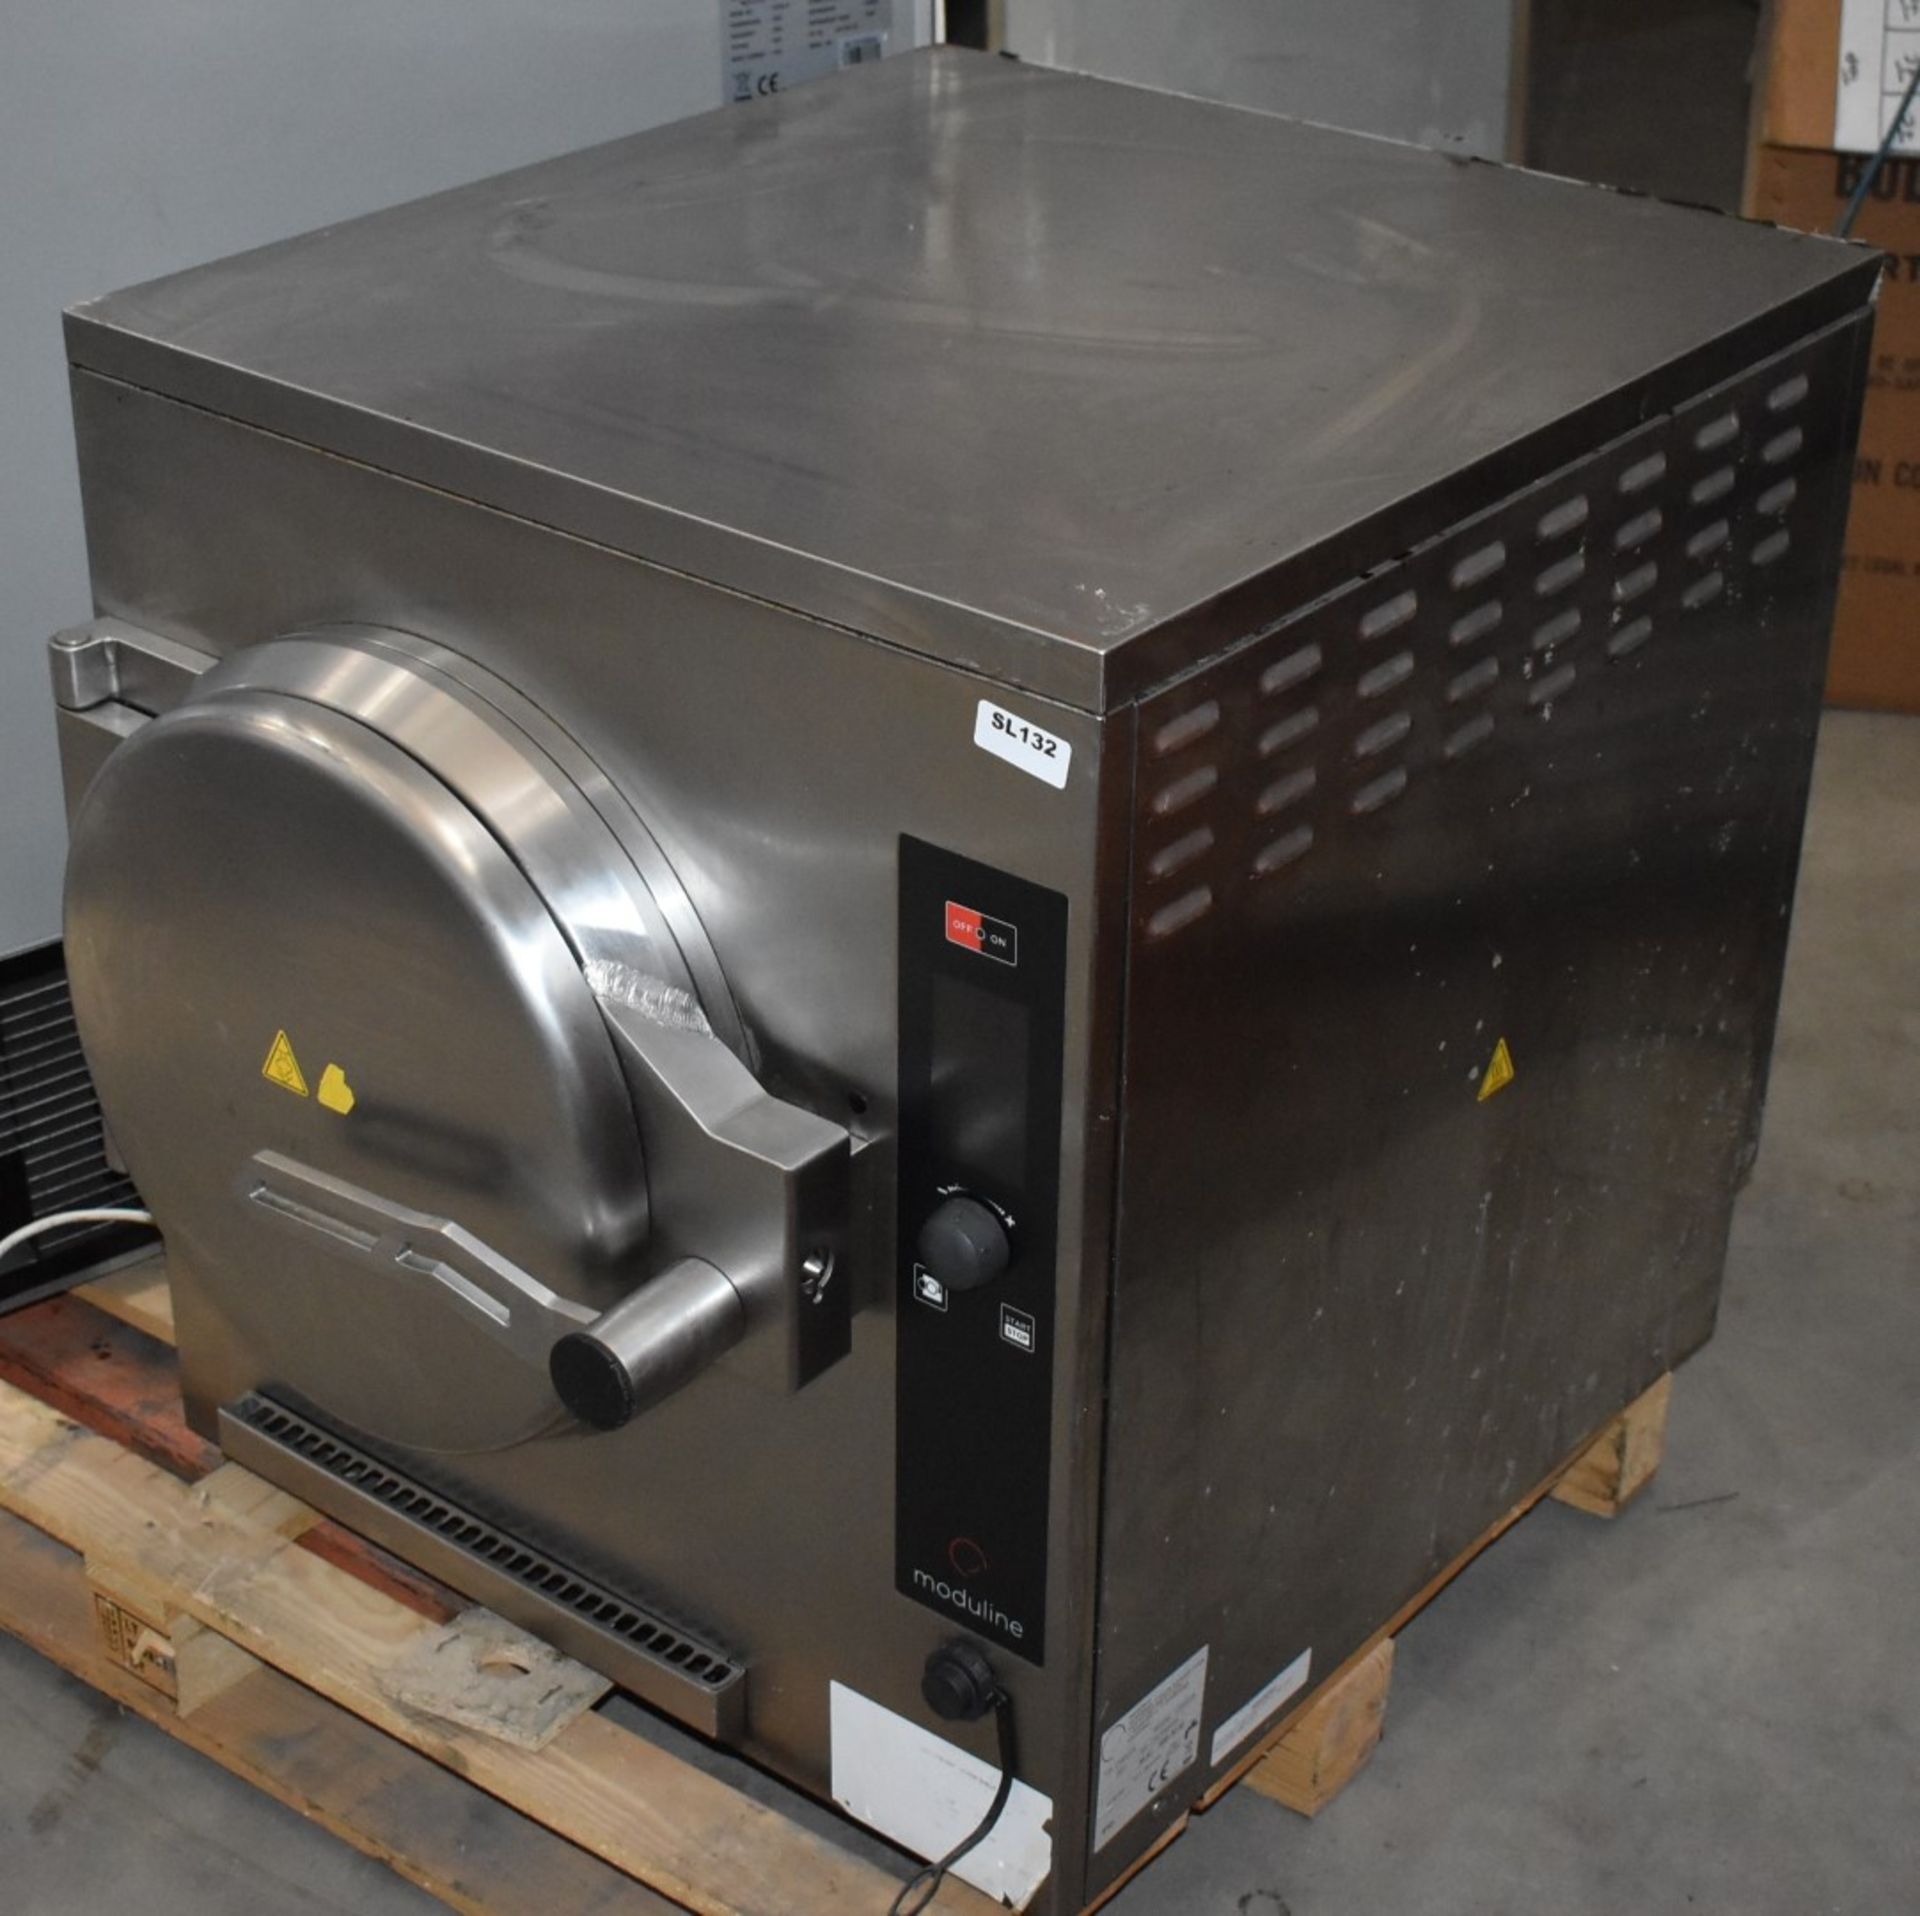 1 x Moduline Pressure Steamer Cooker - Recently Removed From a Supermarket Environment - Model - Image 2 of 8